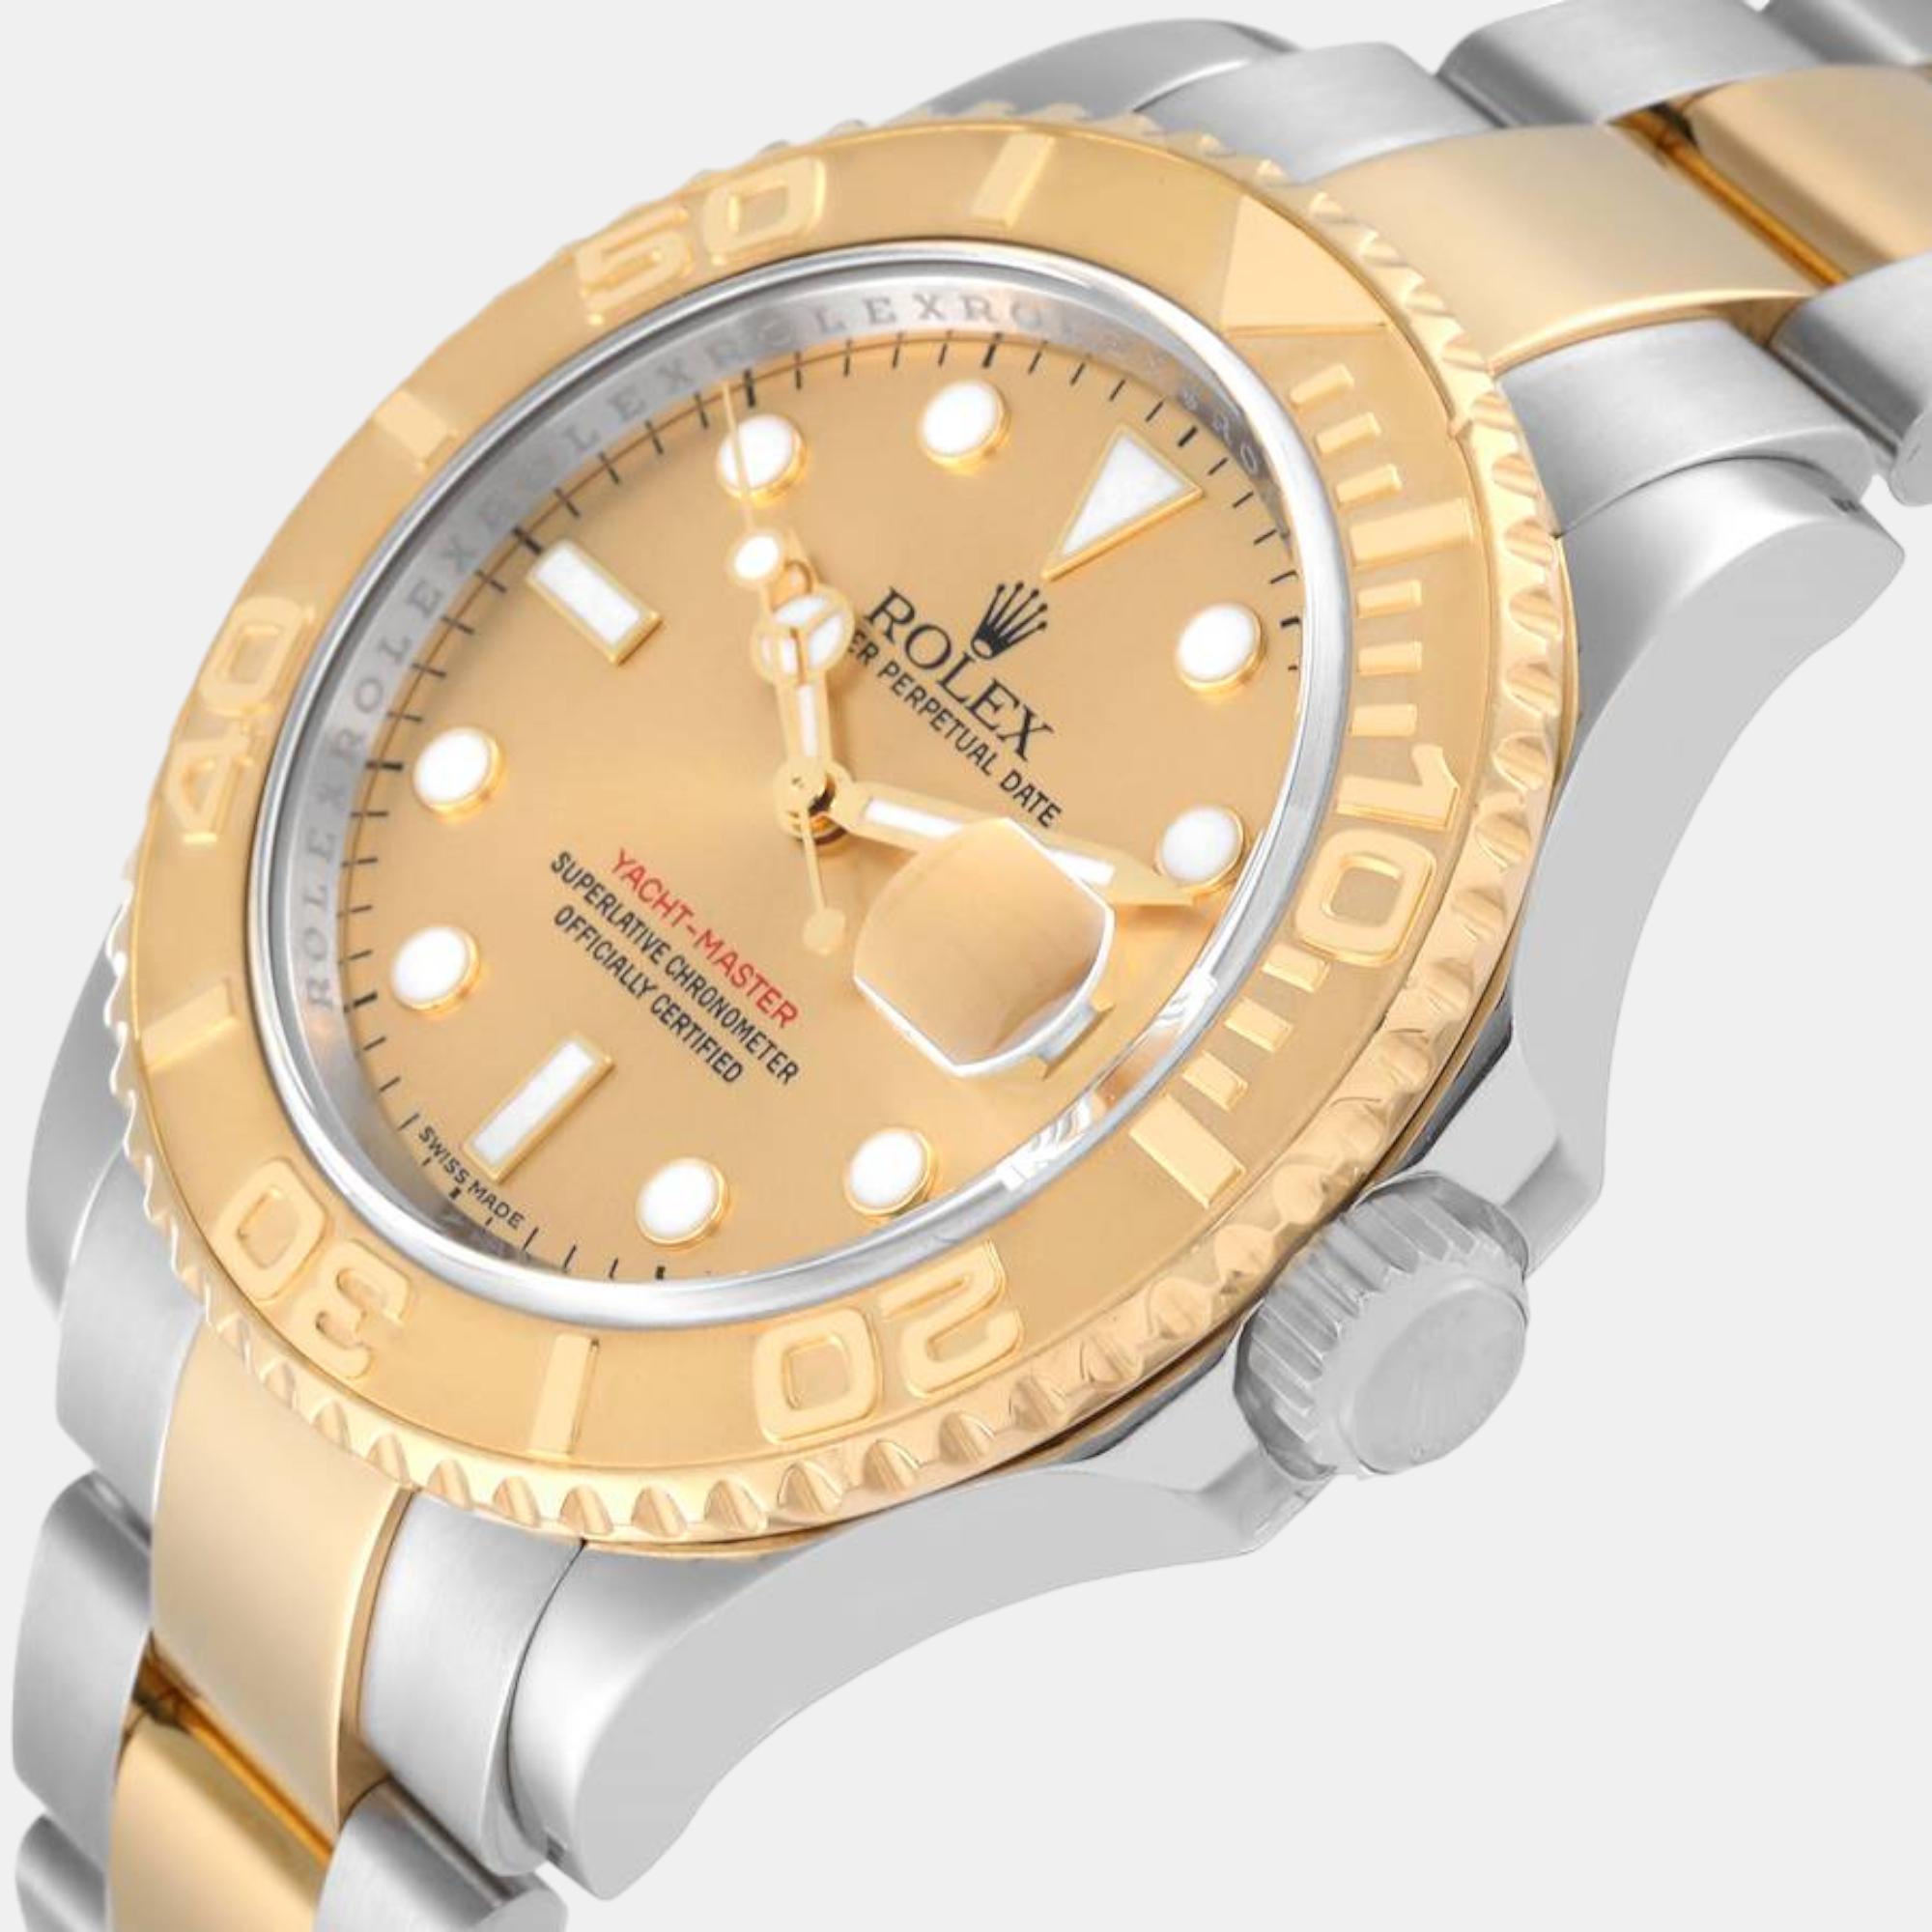 

Rolex Yachtmaster Steel Yellow Gold Champagne Dial Mens Watch 16623